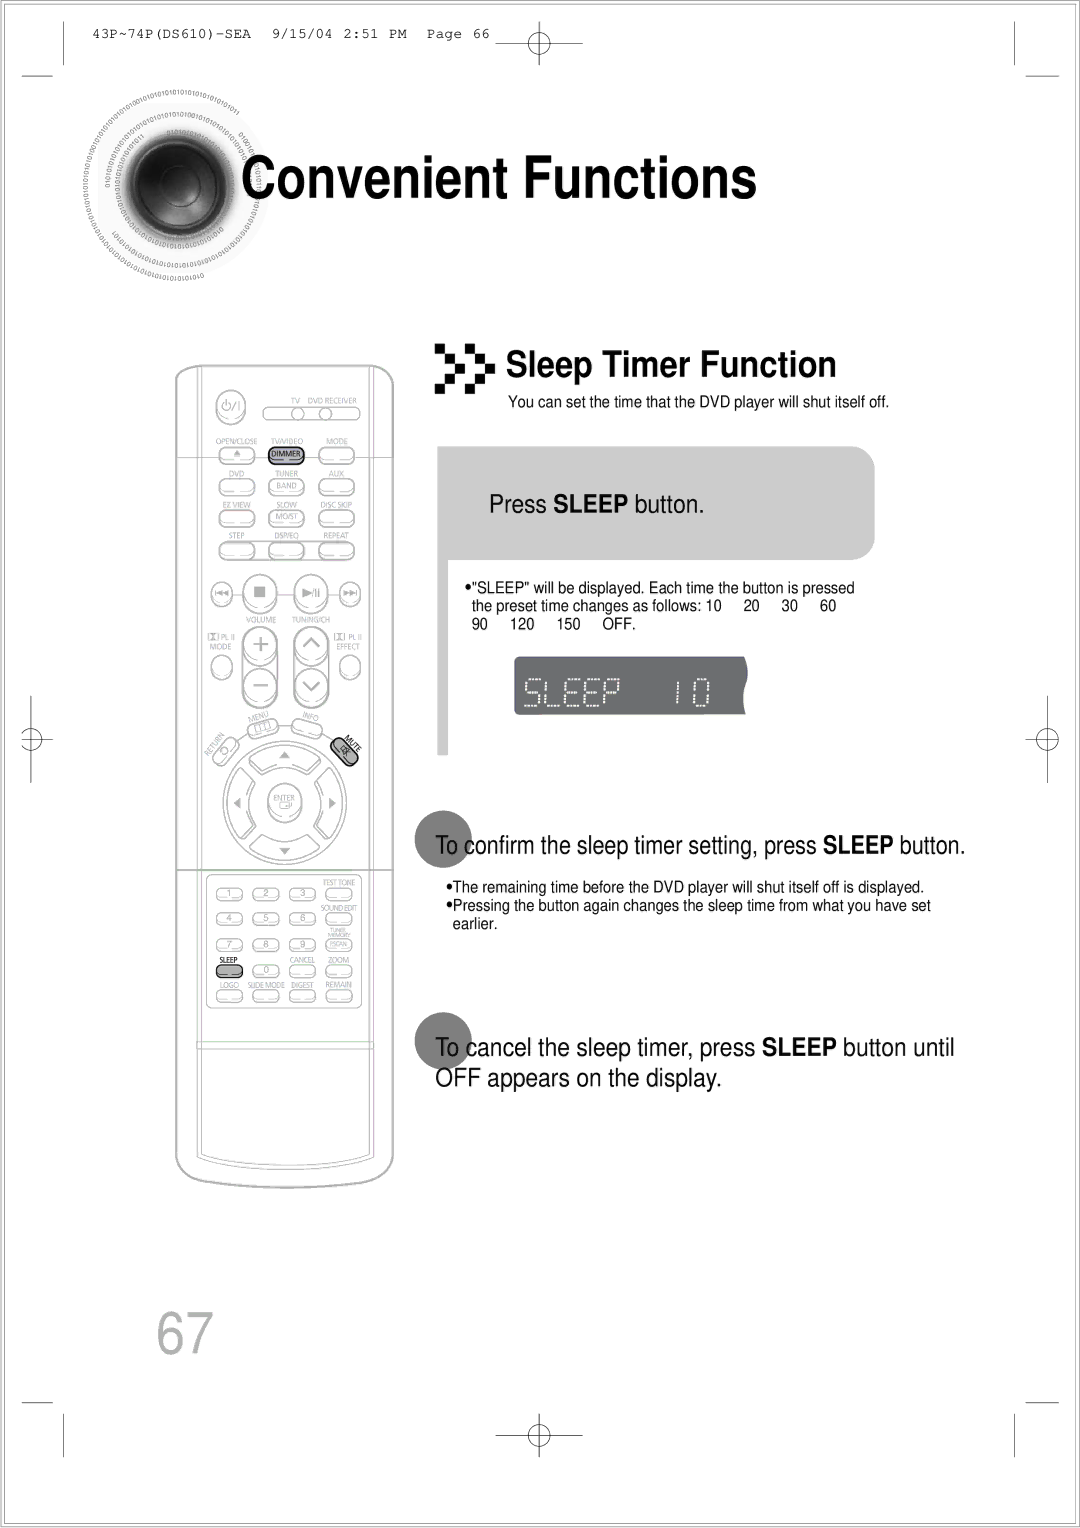 Samsung HT-DS610 Convenient Functions, Press Sleep button, To confirm the sleep timer setting, press Sleep button 